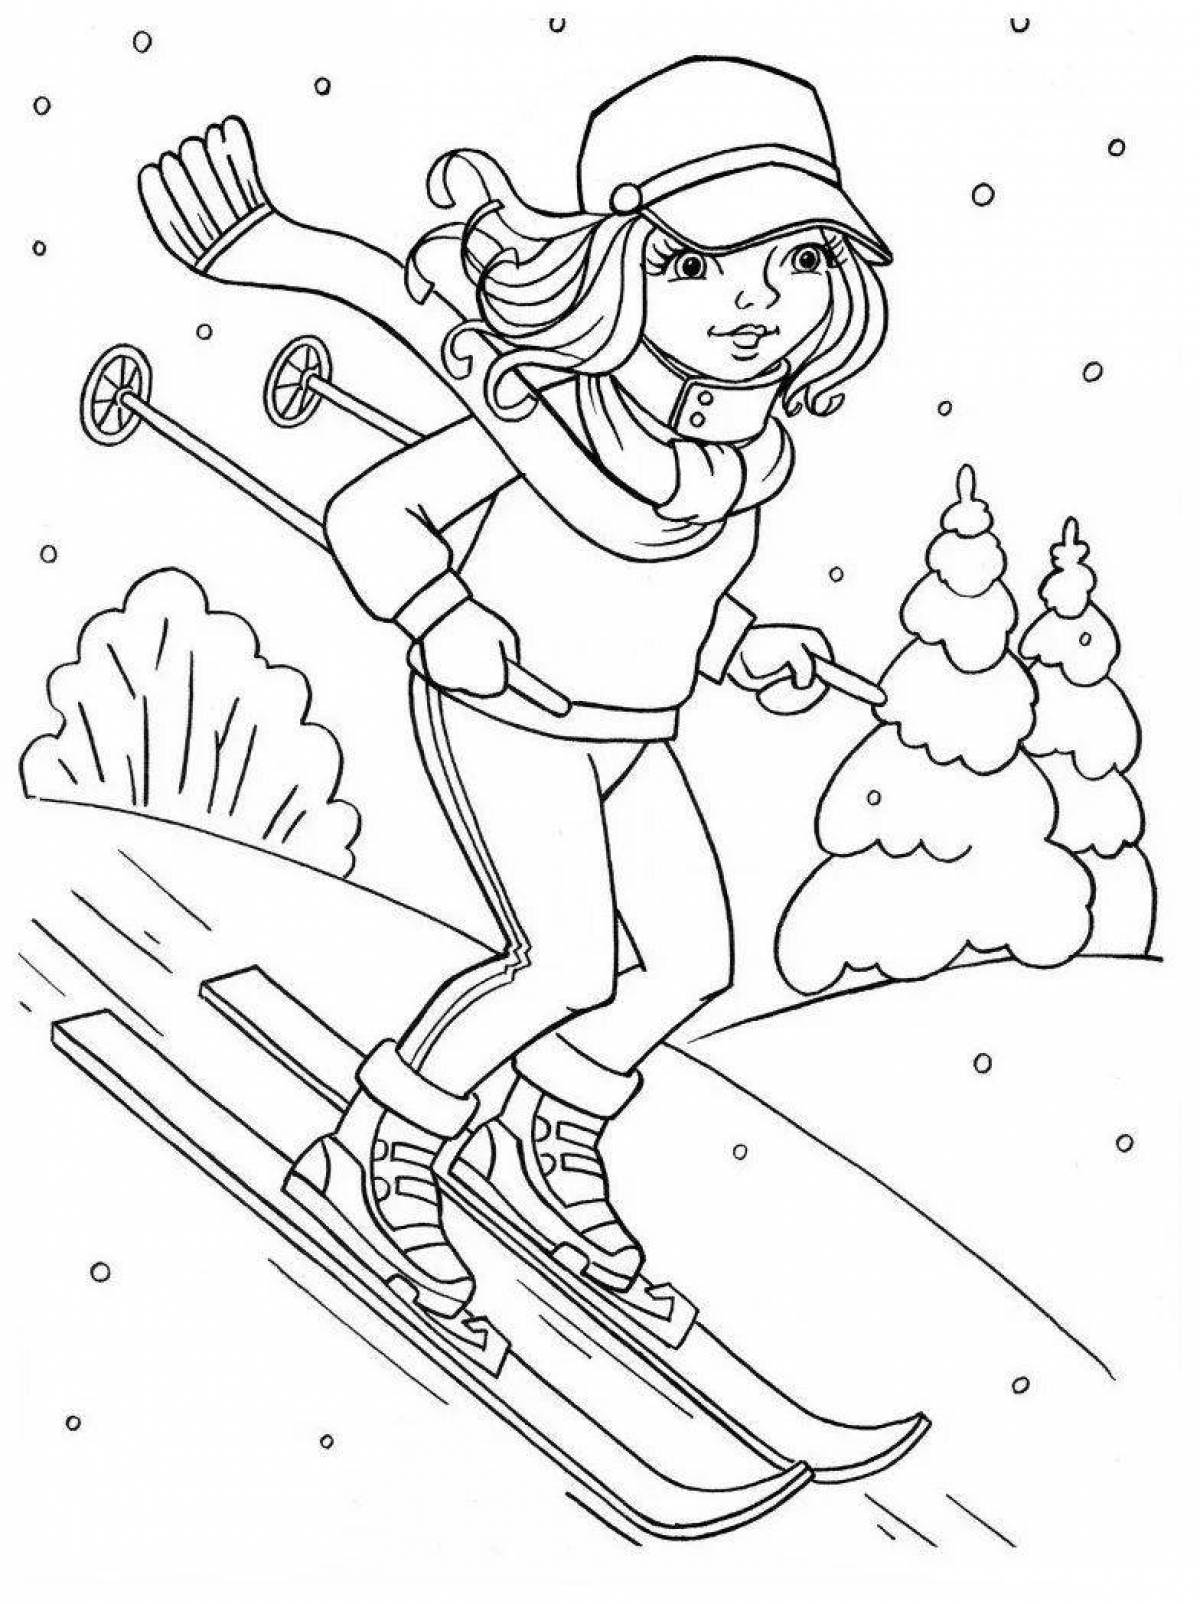 Whimsical winter sports coloring book for kids